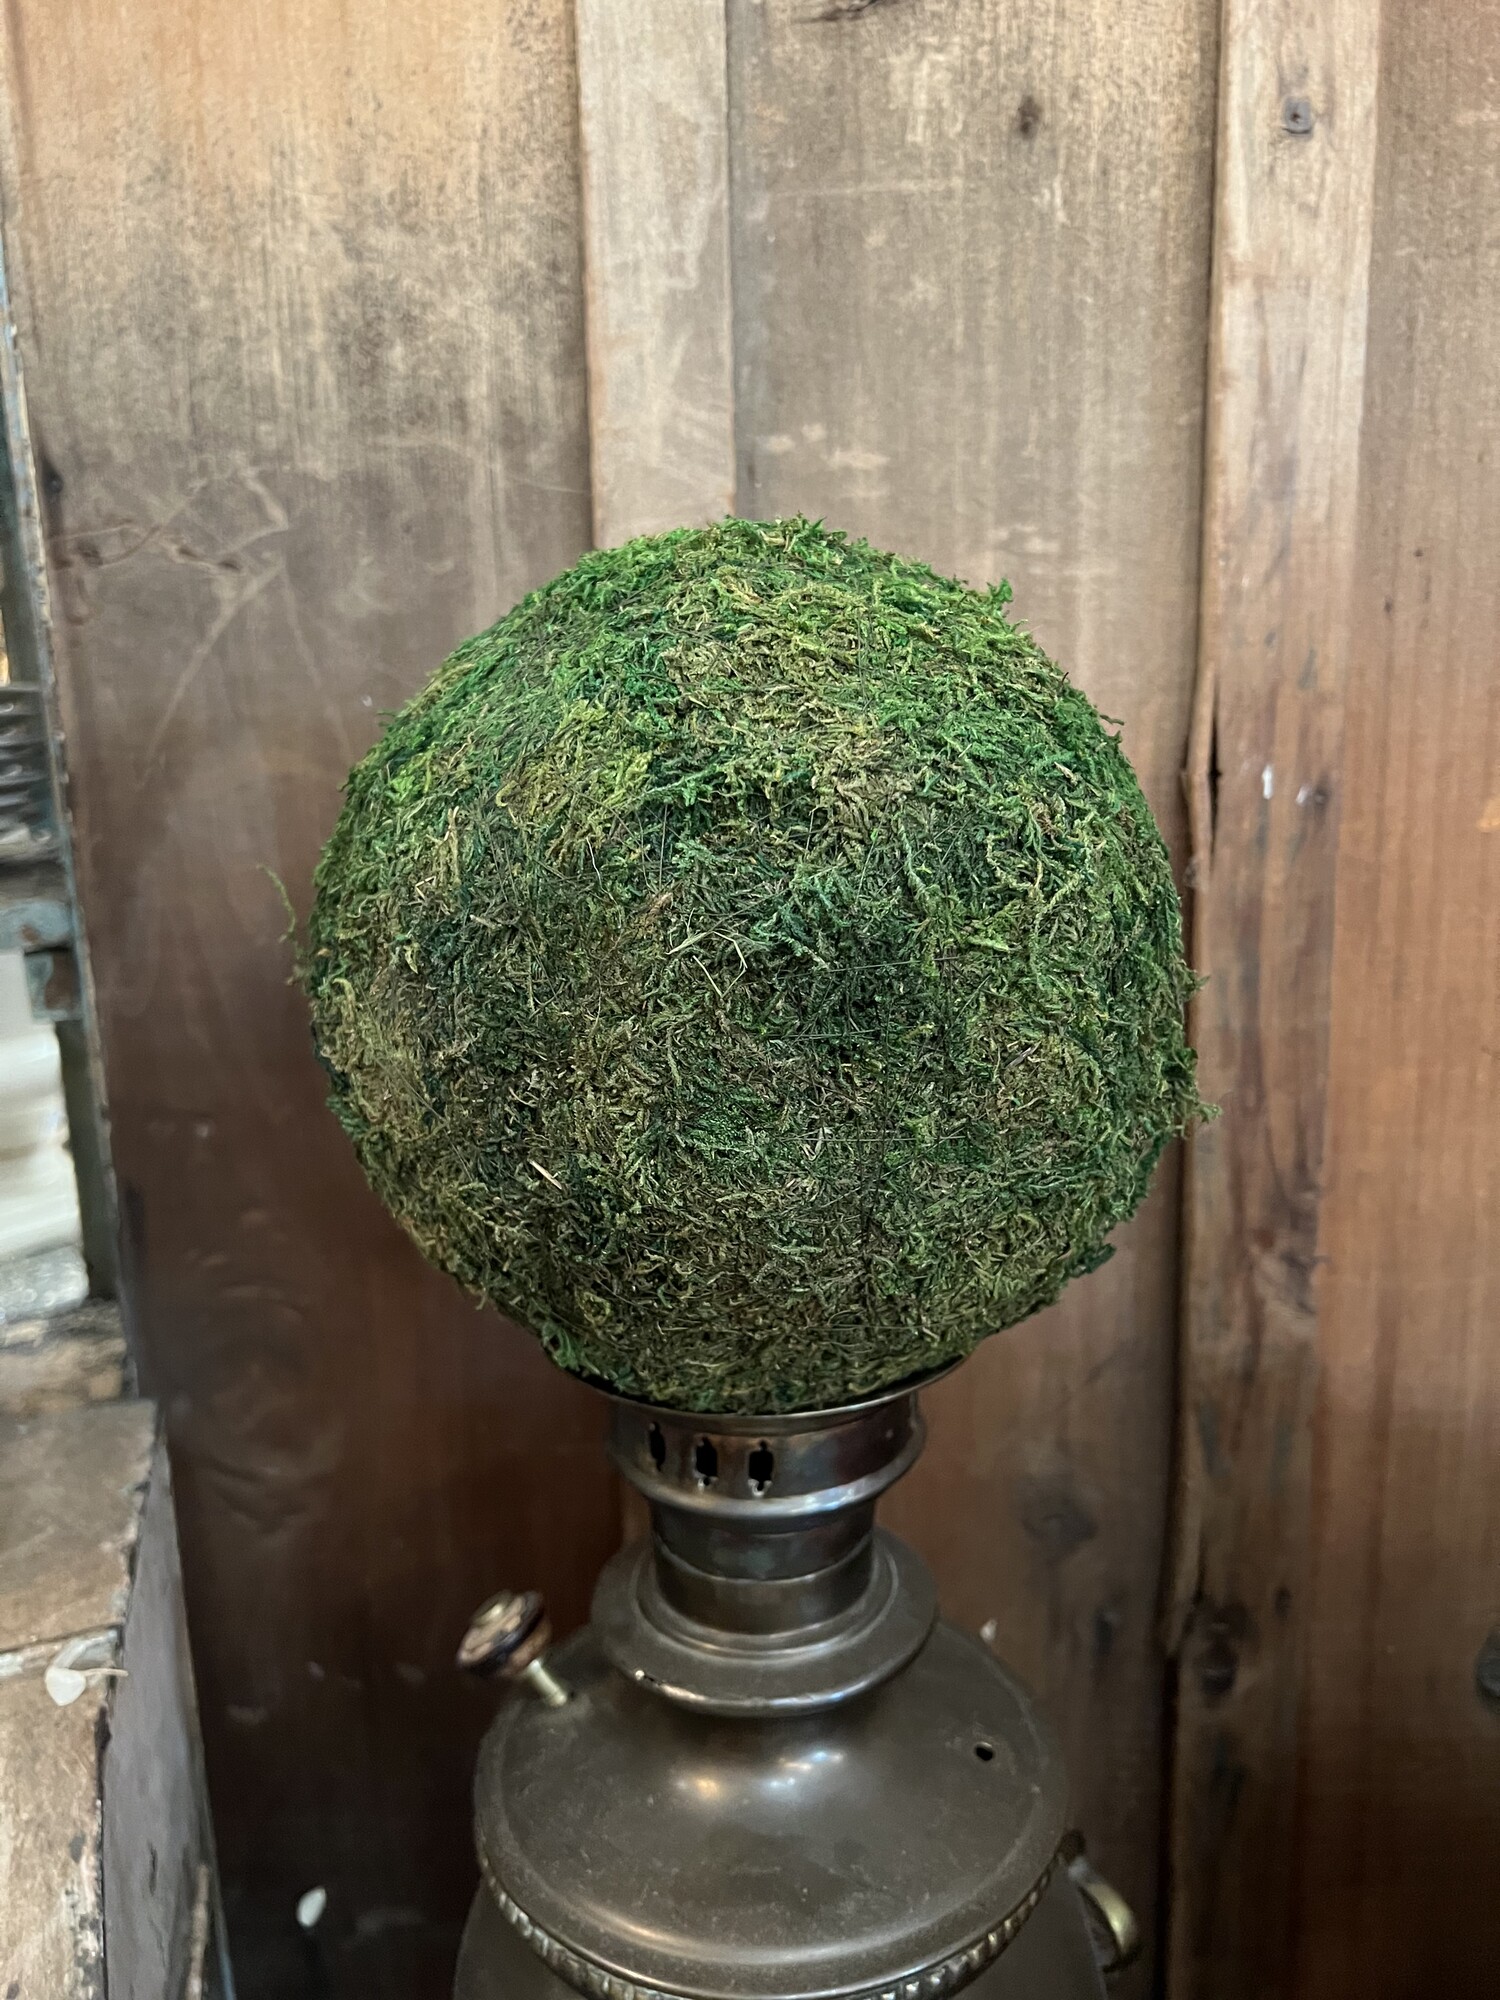 This large Moss ball has endless possibilities in your decor.  Measures 8 inches around